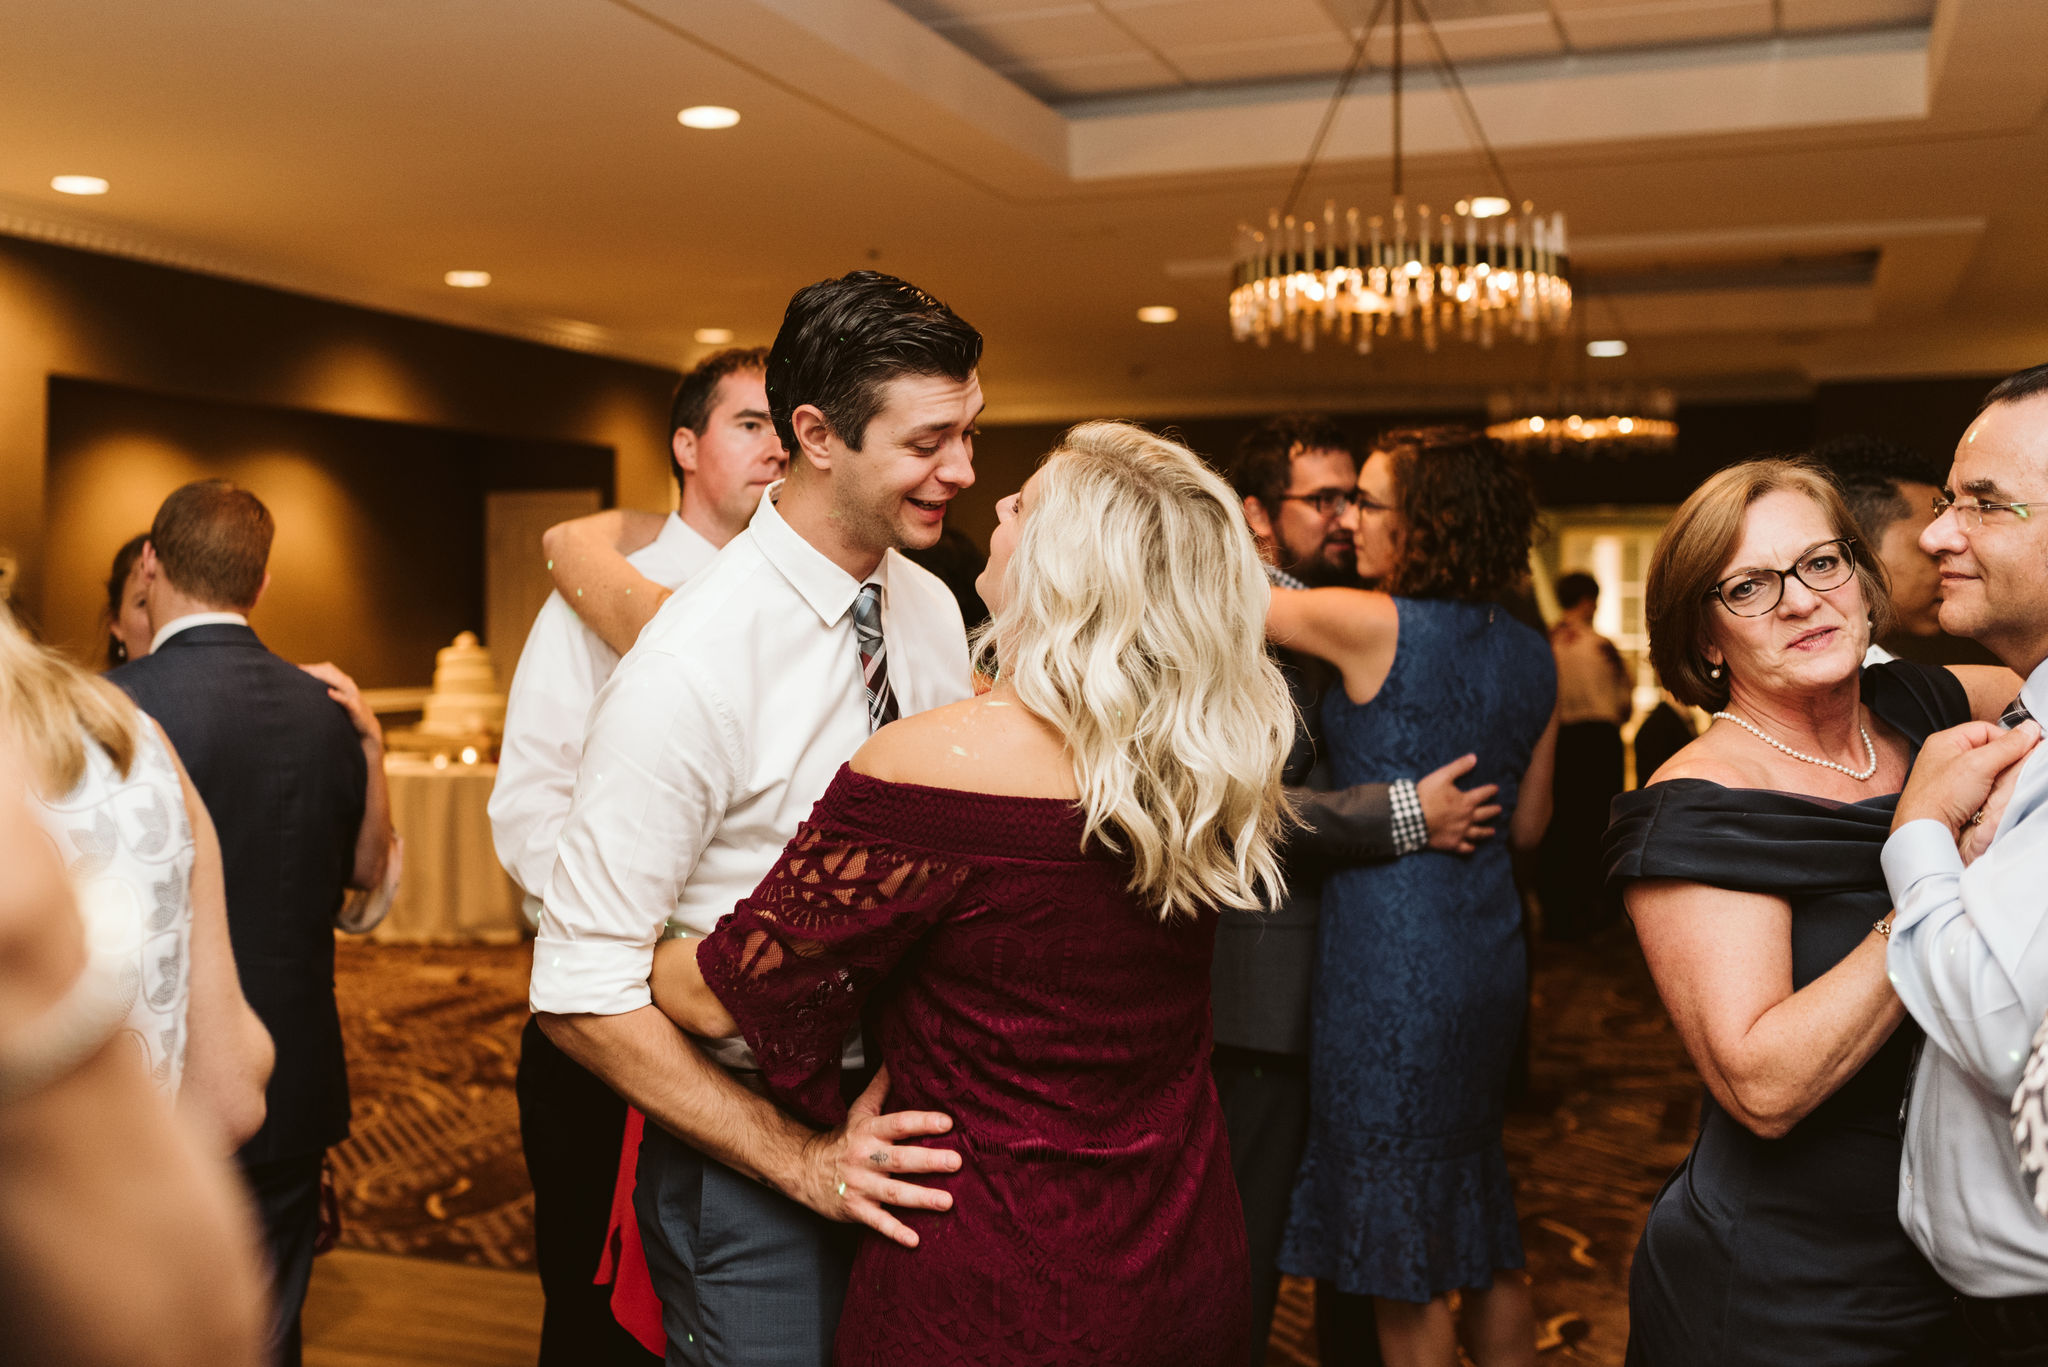  Phoenix Maryland, Baltimore Wedding Photographer, Eagle’s Nest Country Club, Classic, Romantic, Couple Dancing Together at Reception 